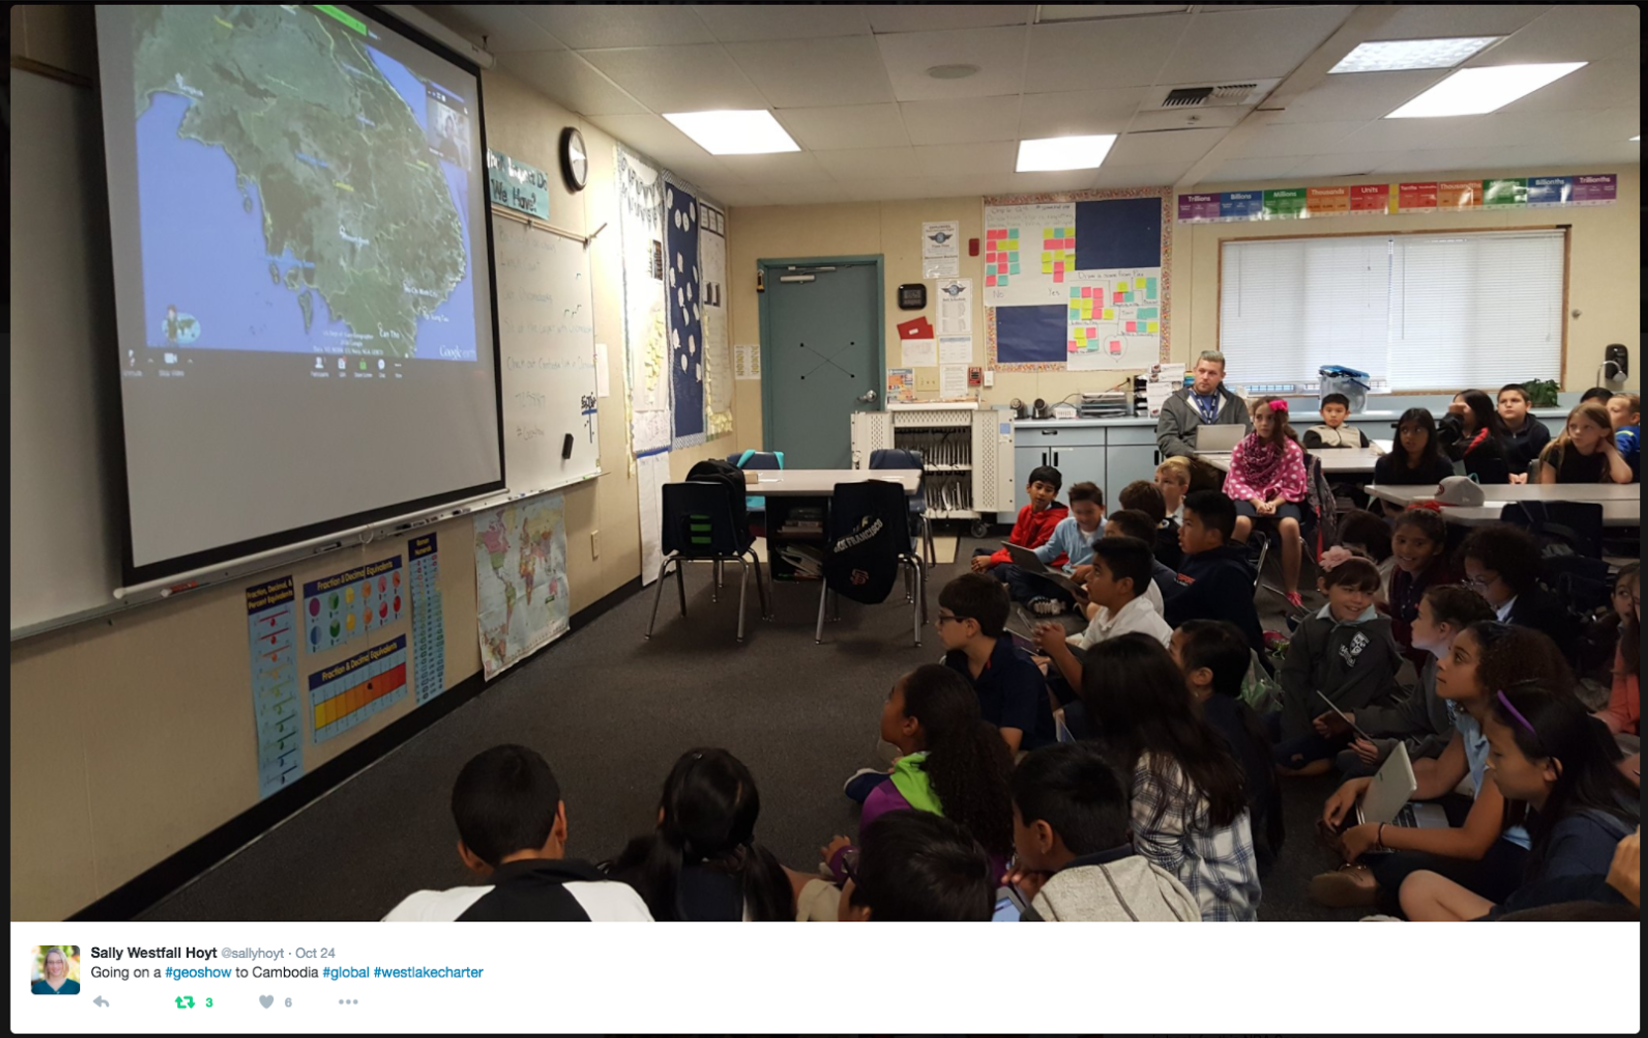 Mrs. Hoyt’s class went on a virtual field lesson to Cambodia this week. On this trip their classroom toured the famous Angkor Wat. The class learned about the Khmer Empire and Hindu Art of Angkor. GEOshow is a Choose Your Own Adventure experience.